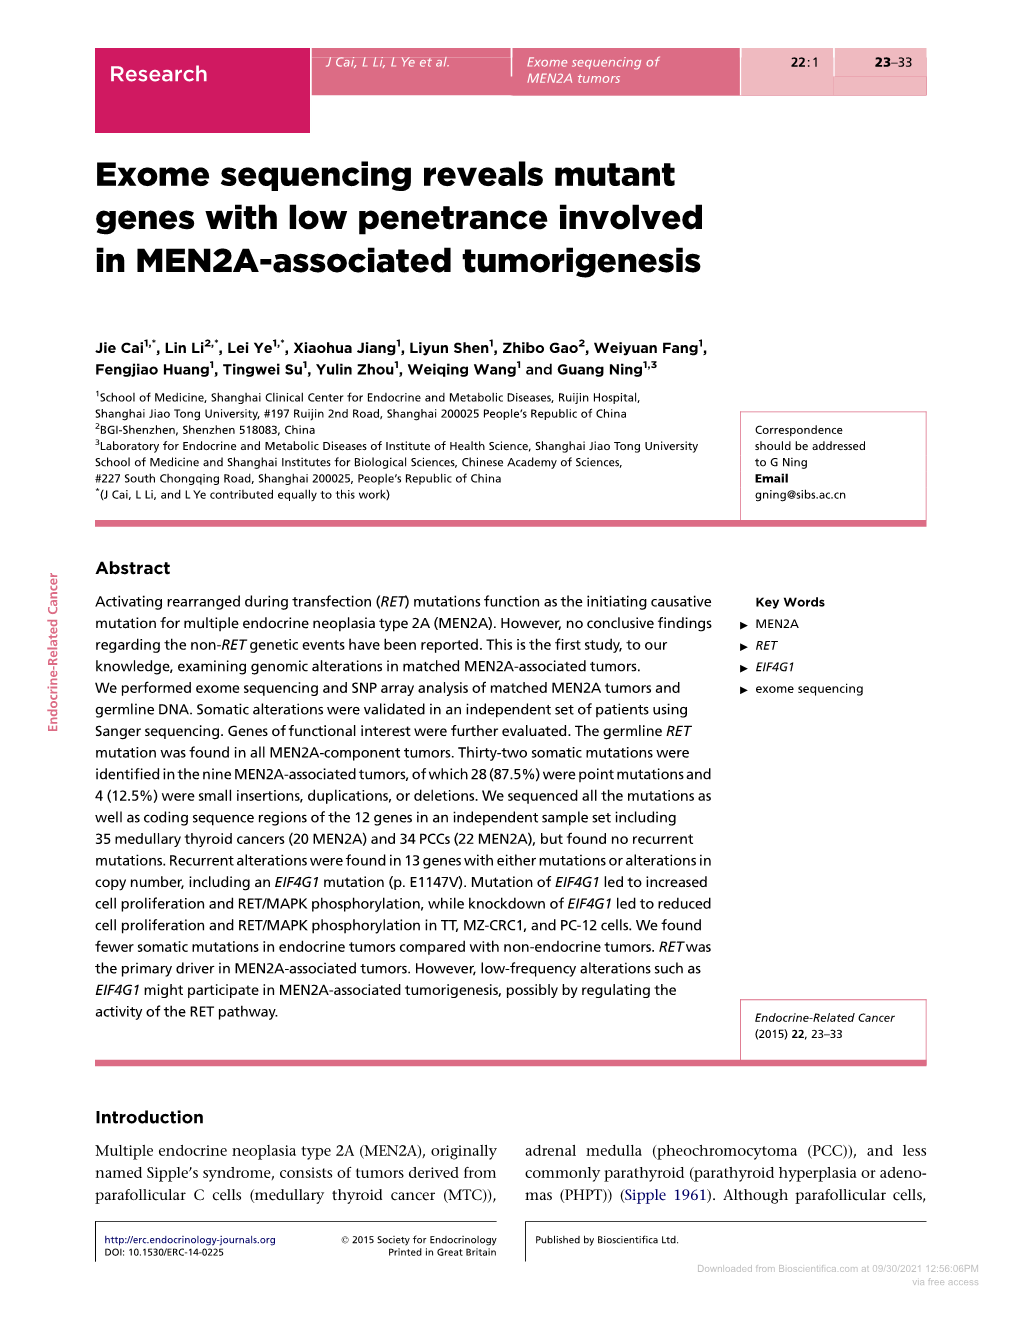 Exome Sequencing Reveals Mutant Genes with Low Penetrance Involved in MEN2A-Associated Tumorigenesis